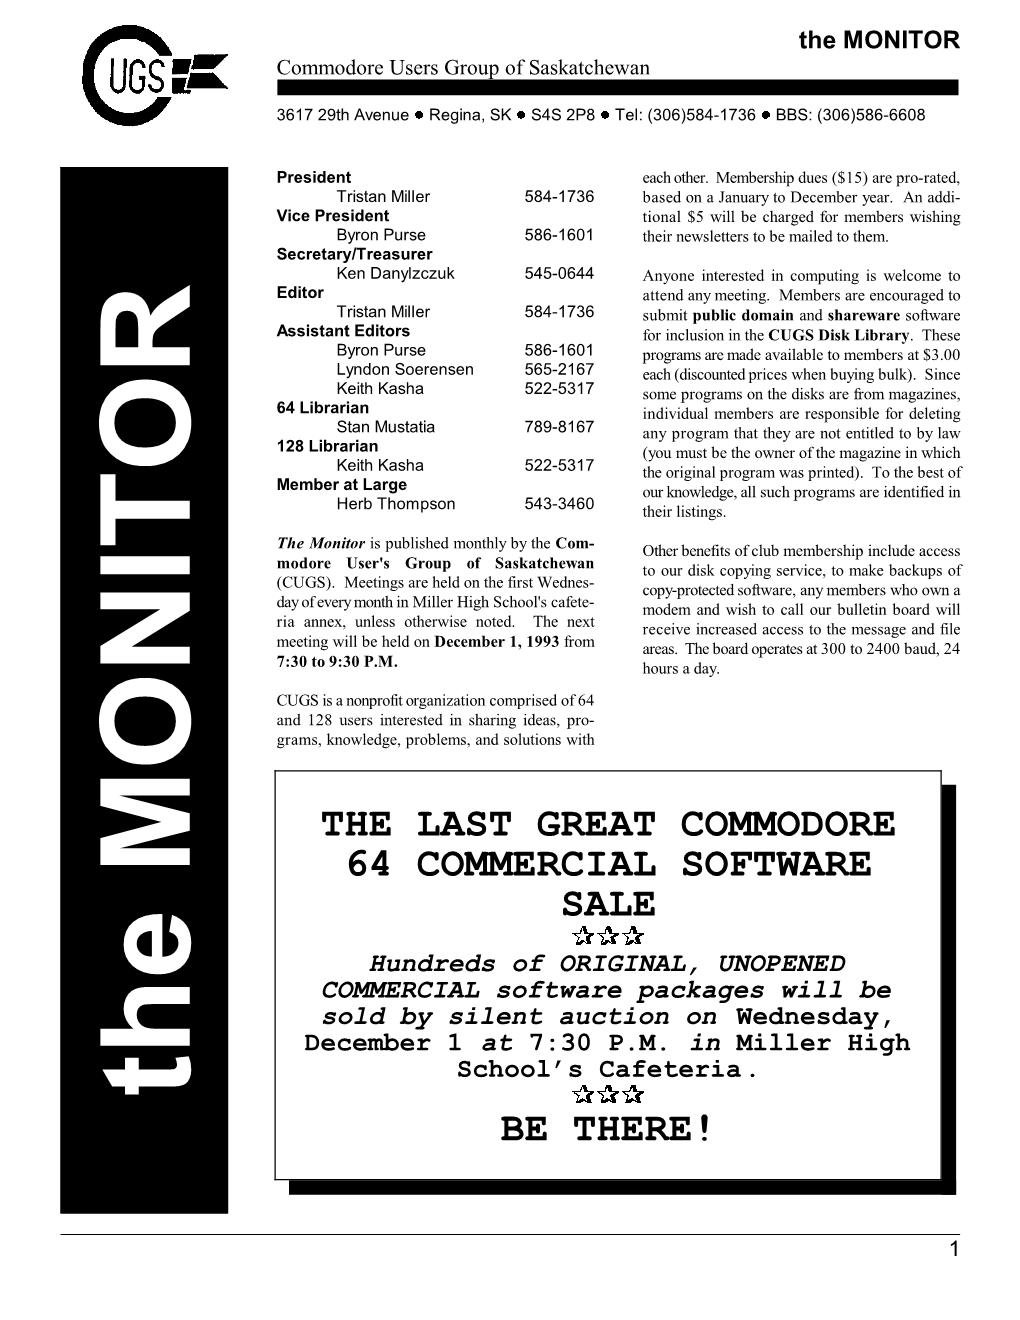 The Last Great Commodore 64 Commercial Software Sale